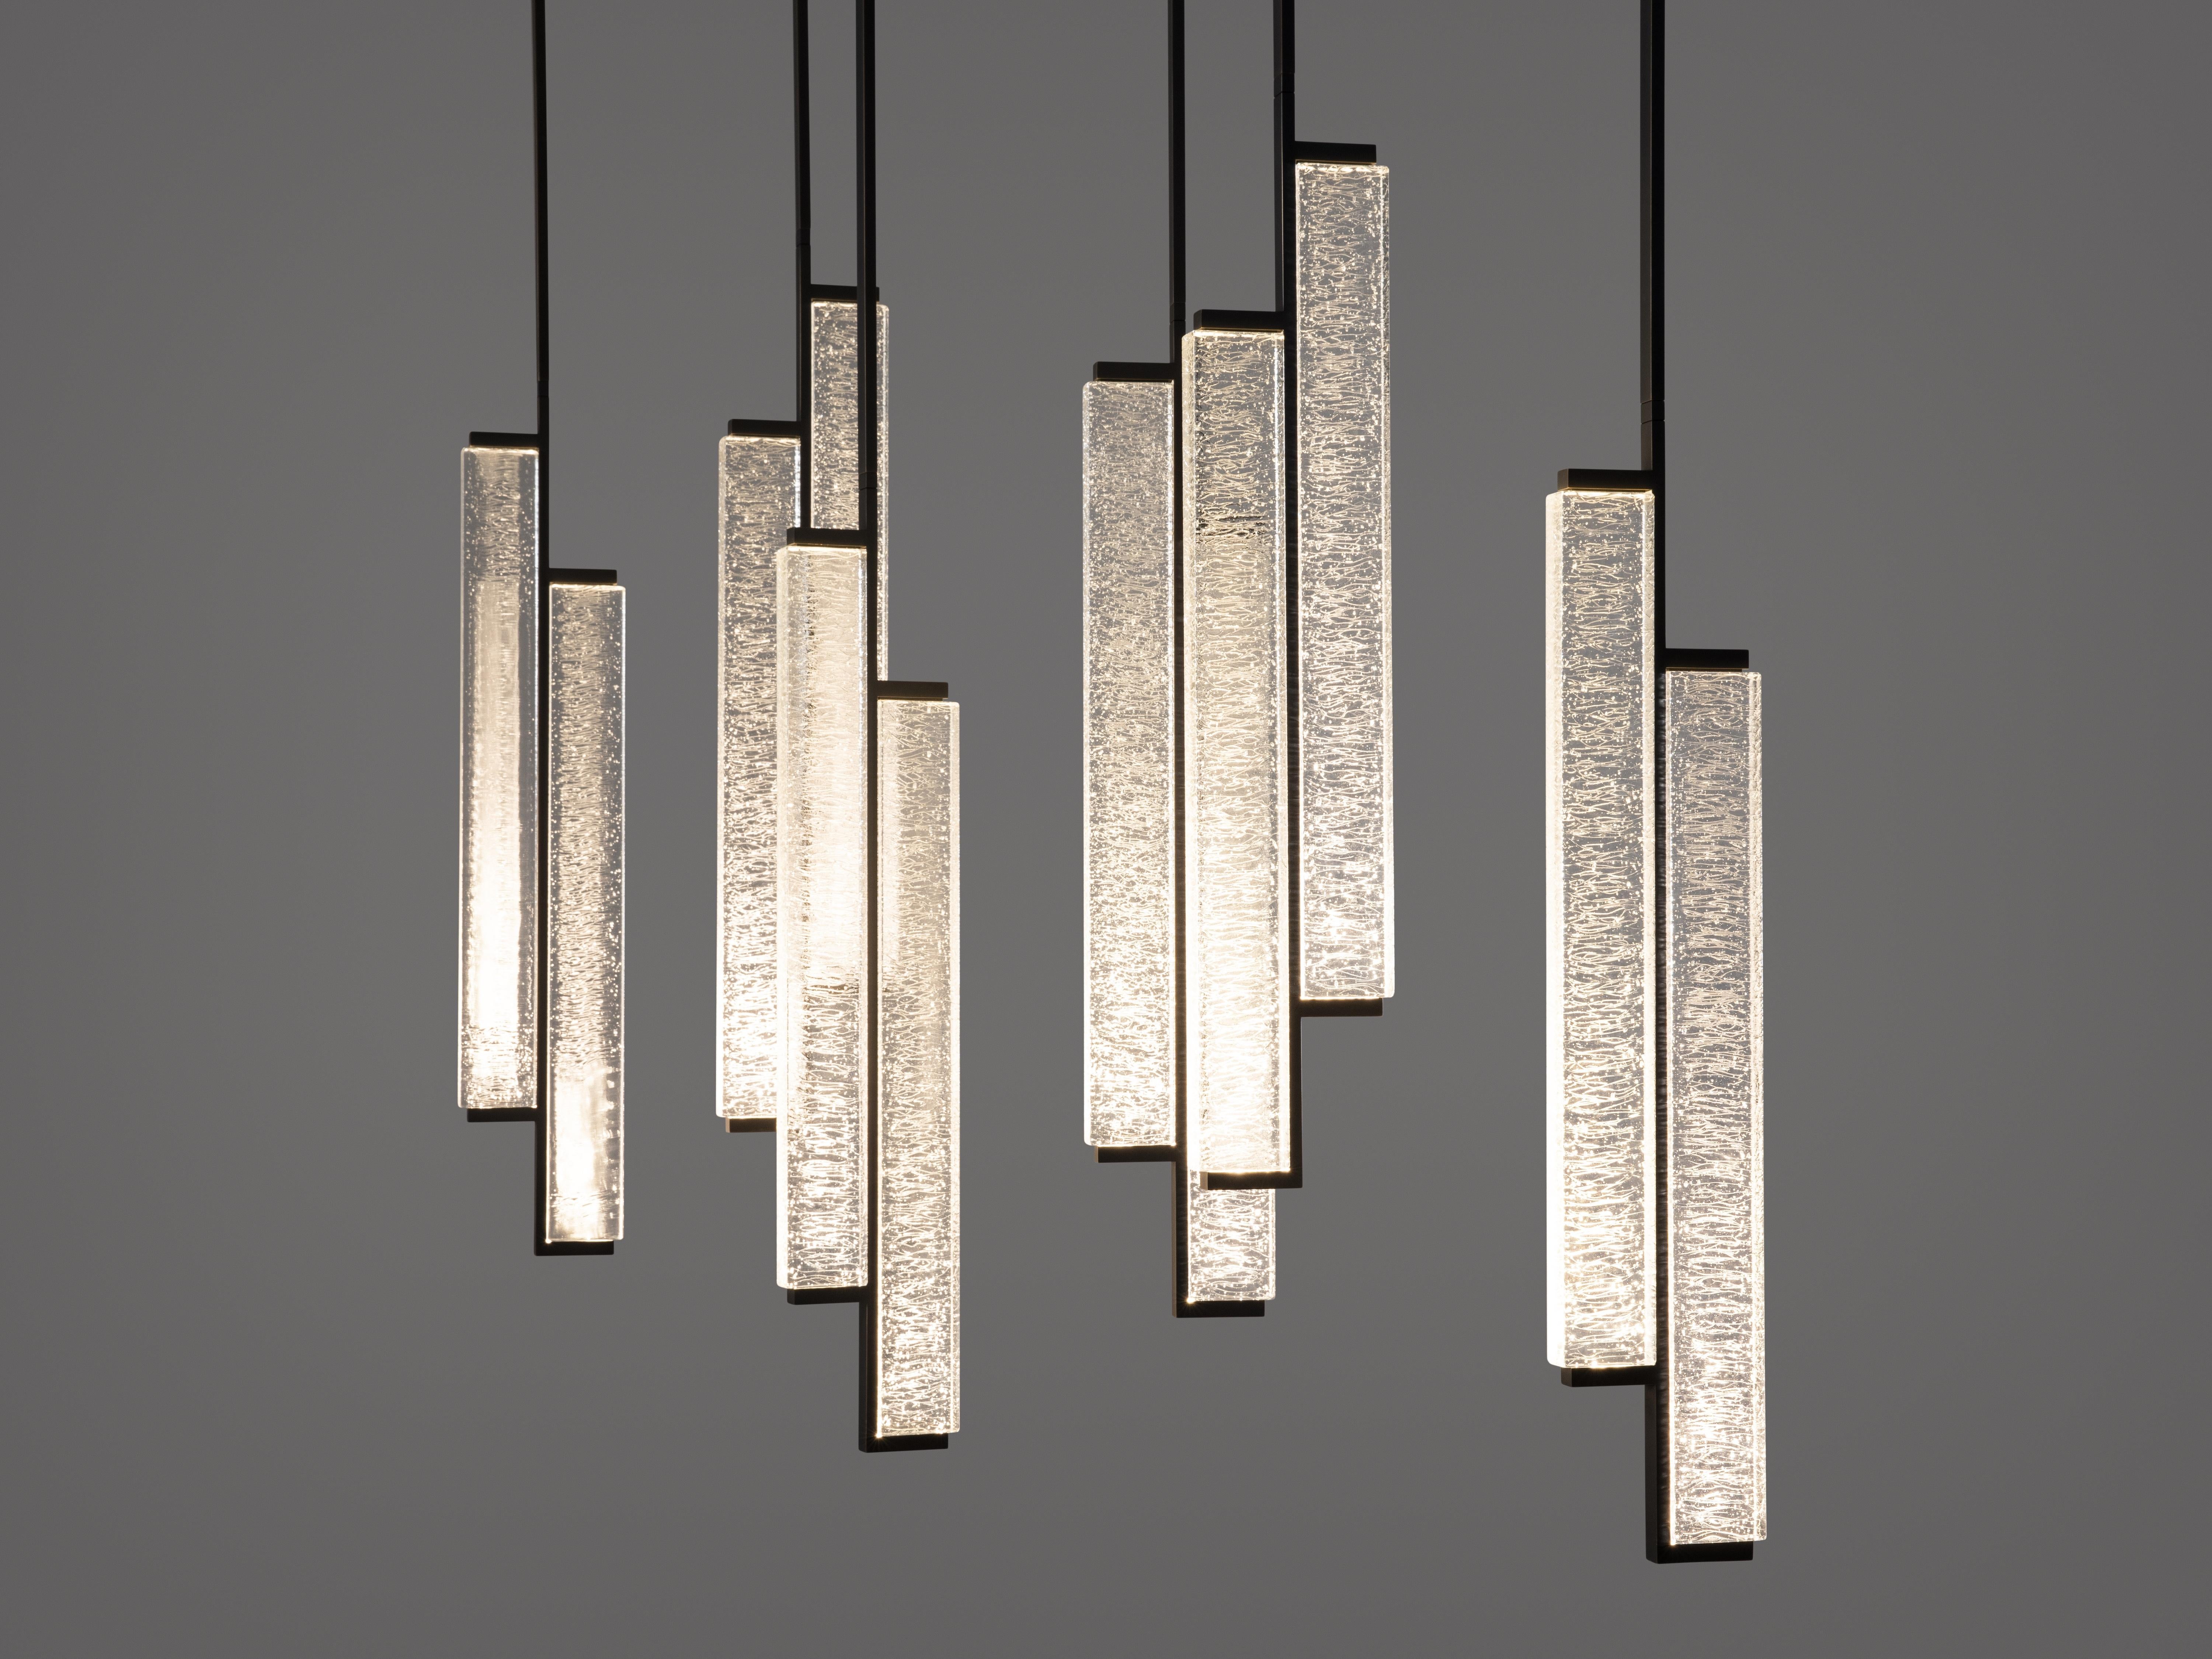 The Kori Chandelier’s cast glass emits a glow reminiscent of dripping icicles at night, inspiring its name which means “ice” in Japanese. The individual pendant units can rotate in a range of angles and positions to best highlight both the space and